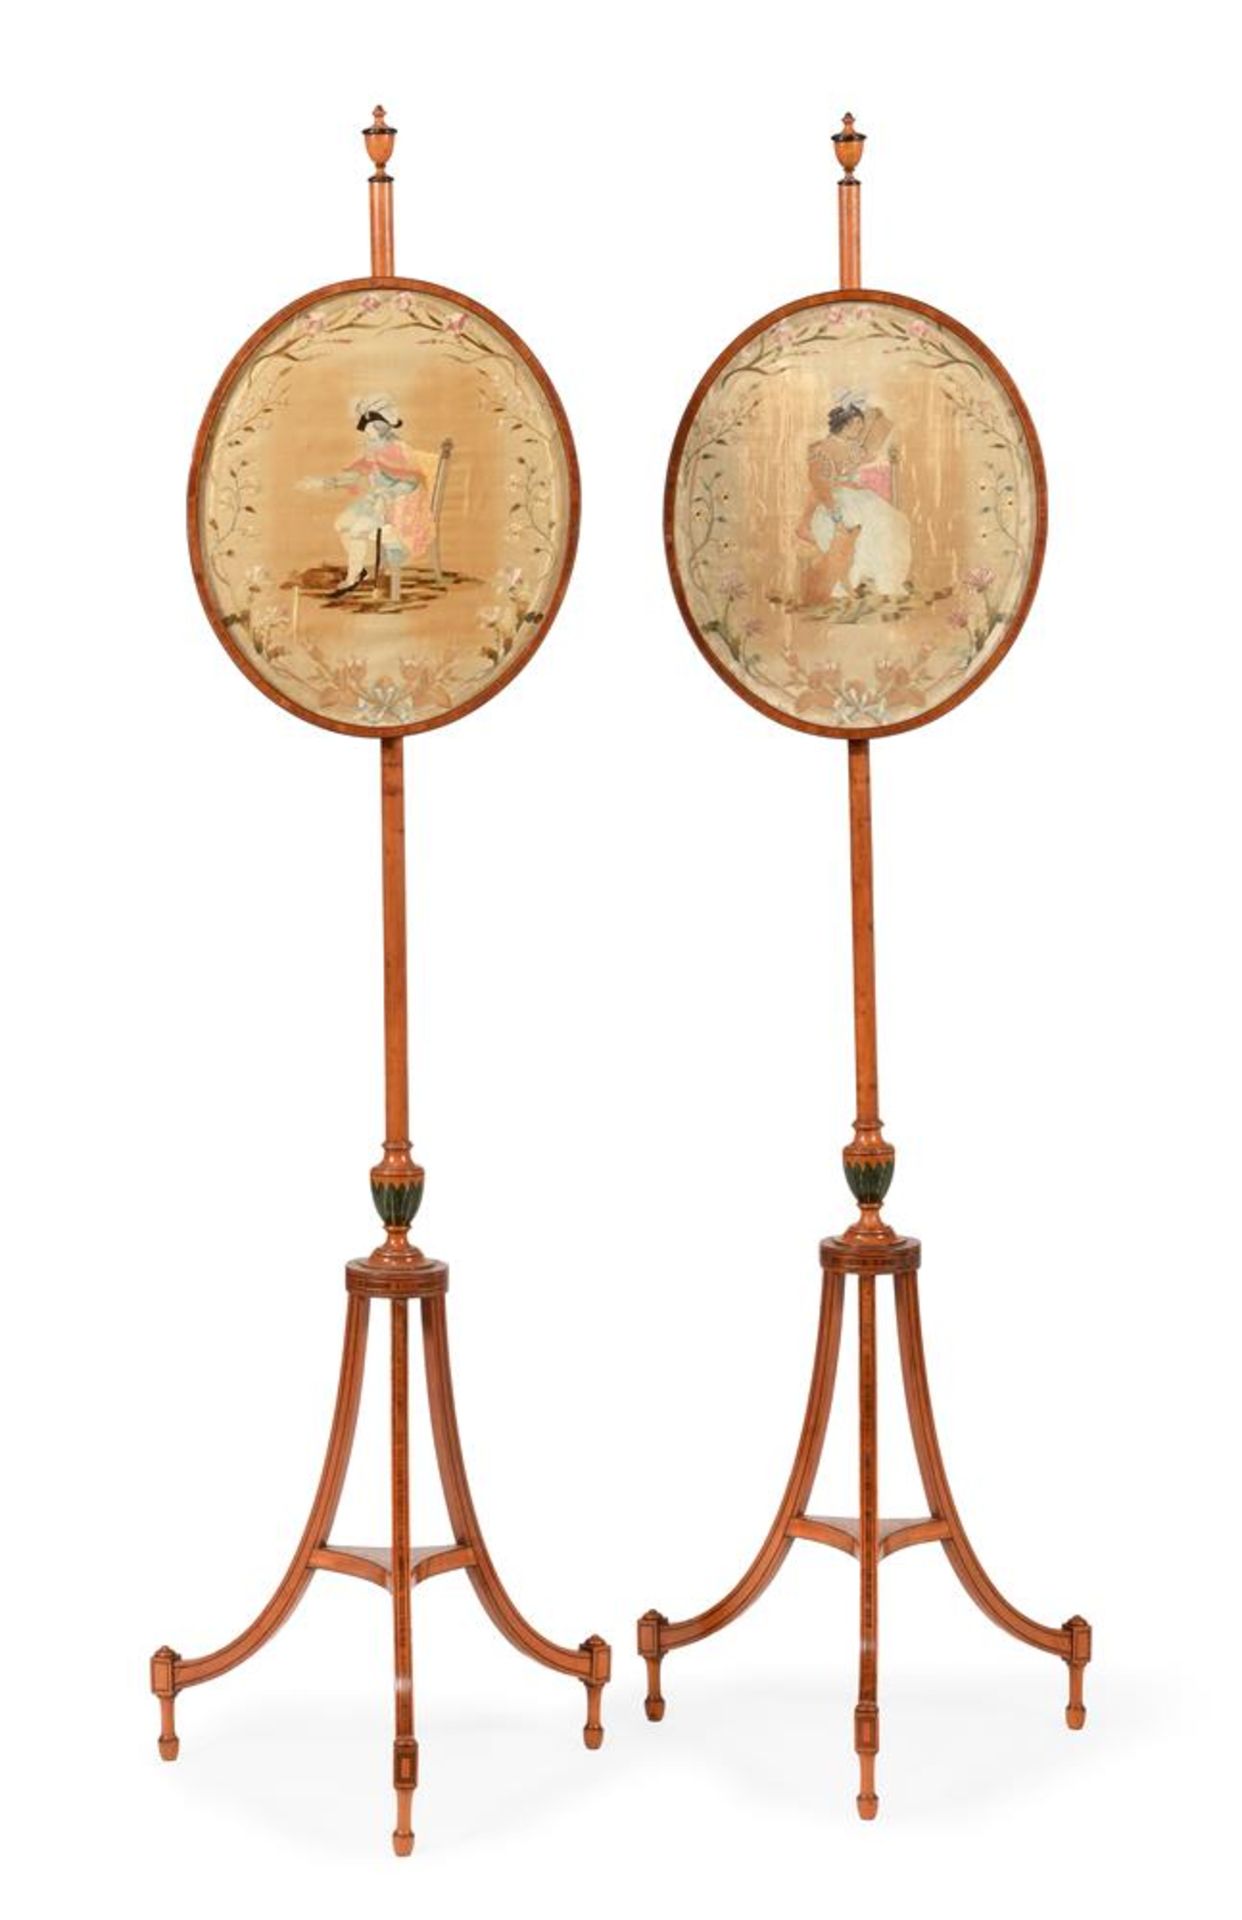 A PAIR OF GEORGE III SATINWOOD AND POLYCHROME PAINTED POLE SCREENS, CIRCA 1800